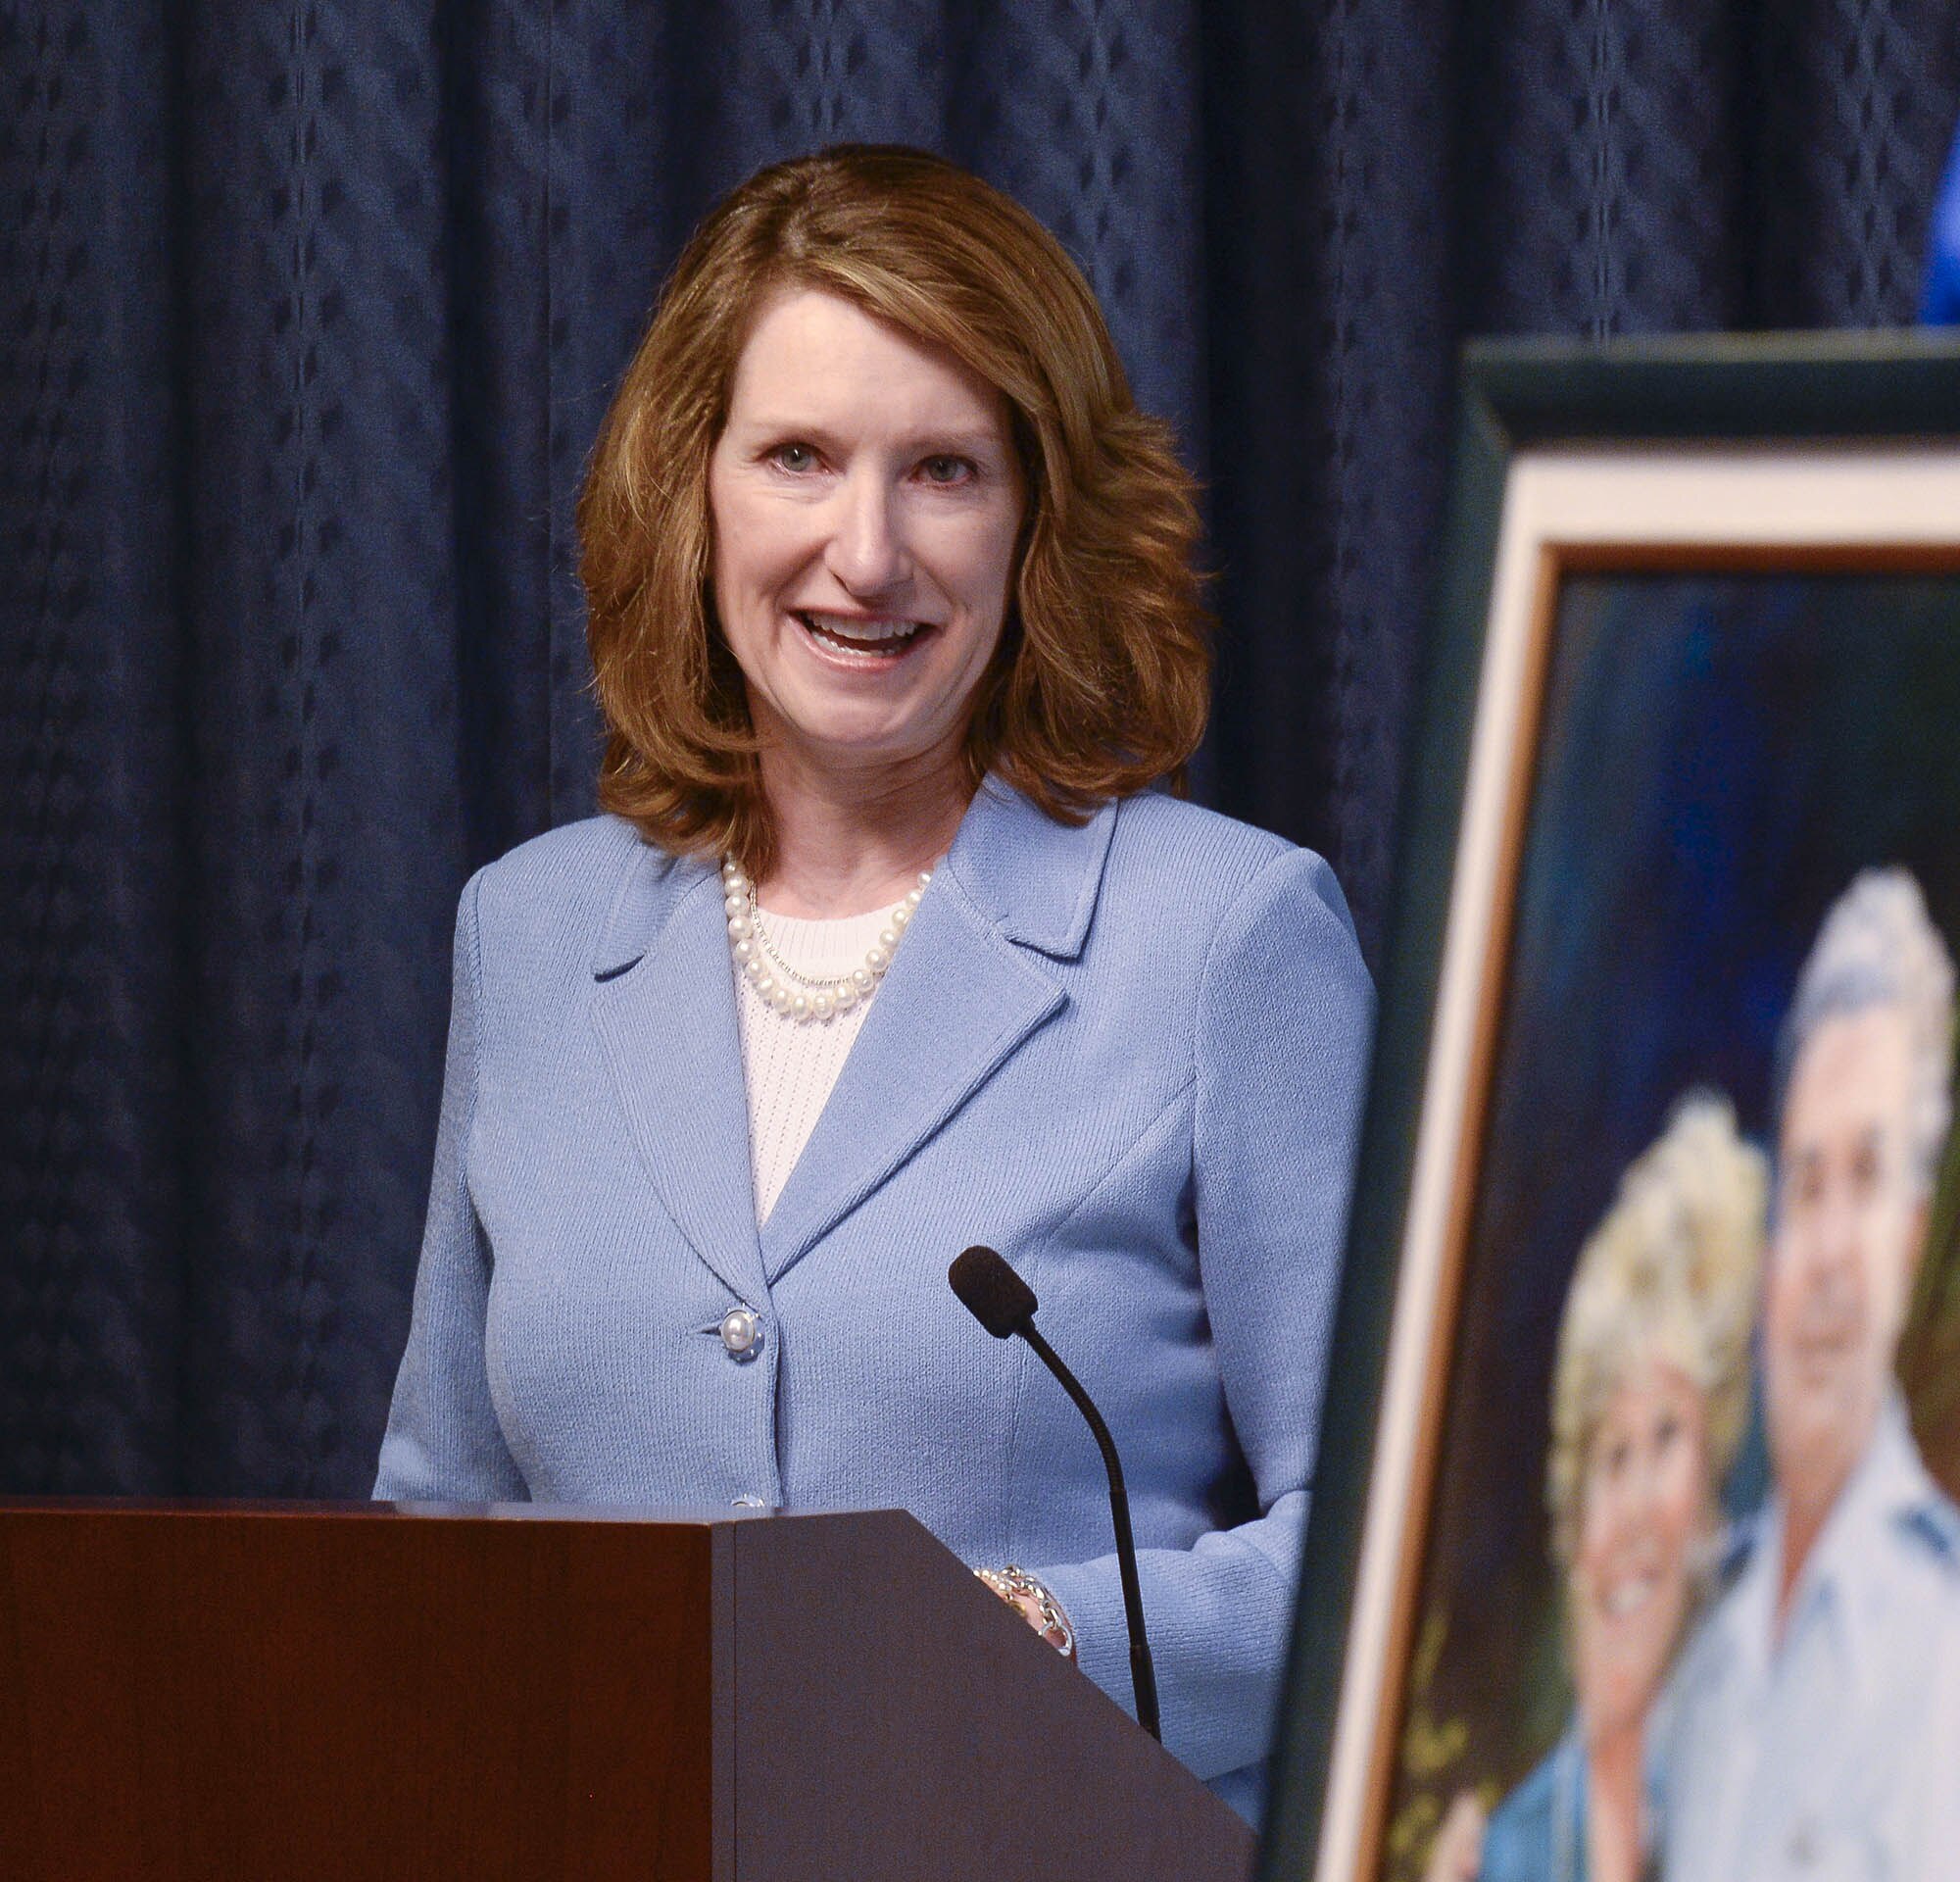 Under Secretary of the Air Force Lisa Disbrow talks about the achievements of Col. William Liquori Jr. and his wife, Amy, before she presents them the 2015 General and Mrs. Jerome F. O'Malley Award during a ceremony in the Pentagon May 3, 2016.  The award was earned during the Liquoris’ time leading the 50th Space Wing at Schriever Air Force Base, Colo. (U.S. Air Force photo/Andy Morataya)